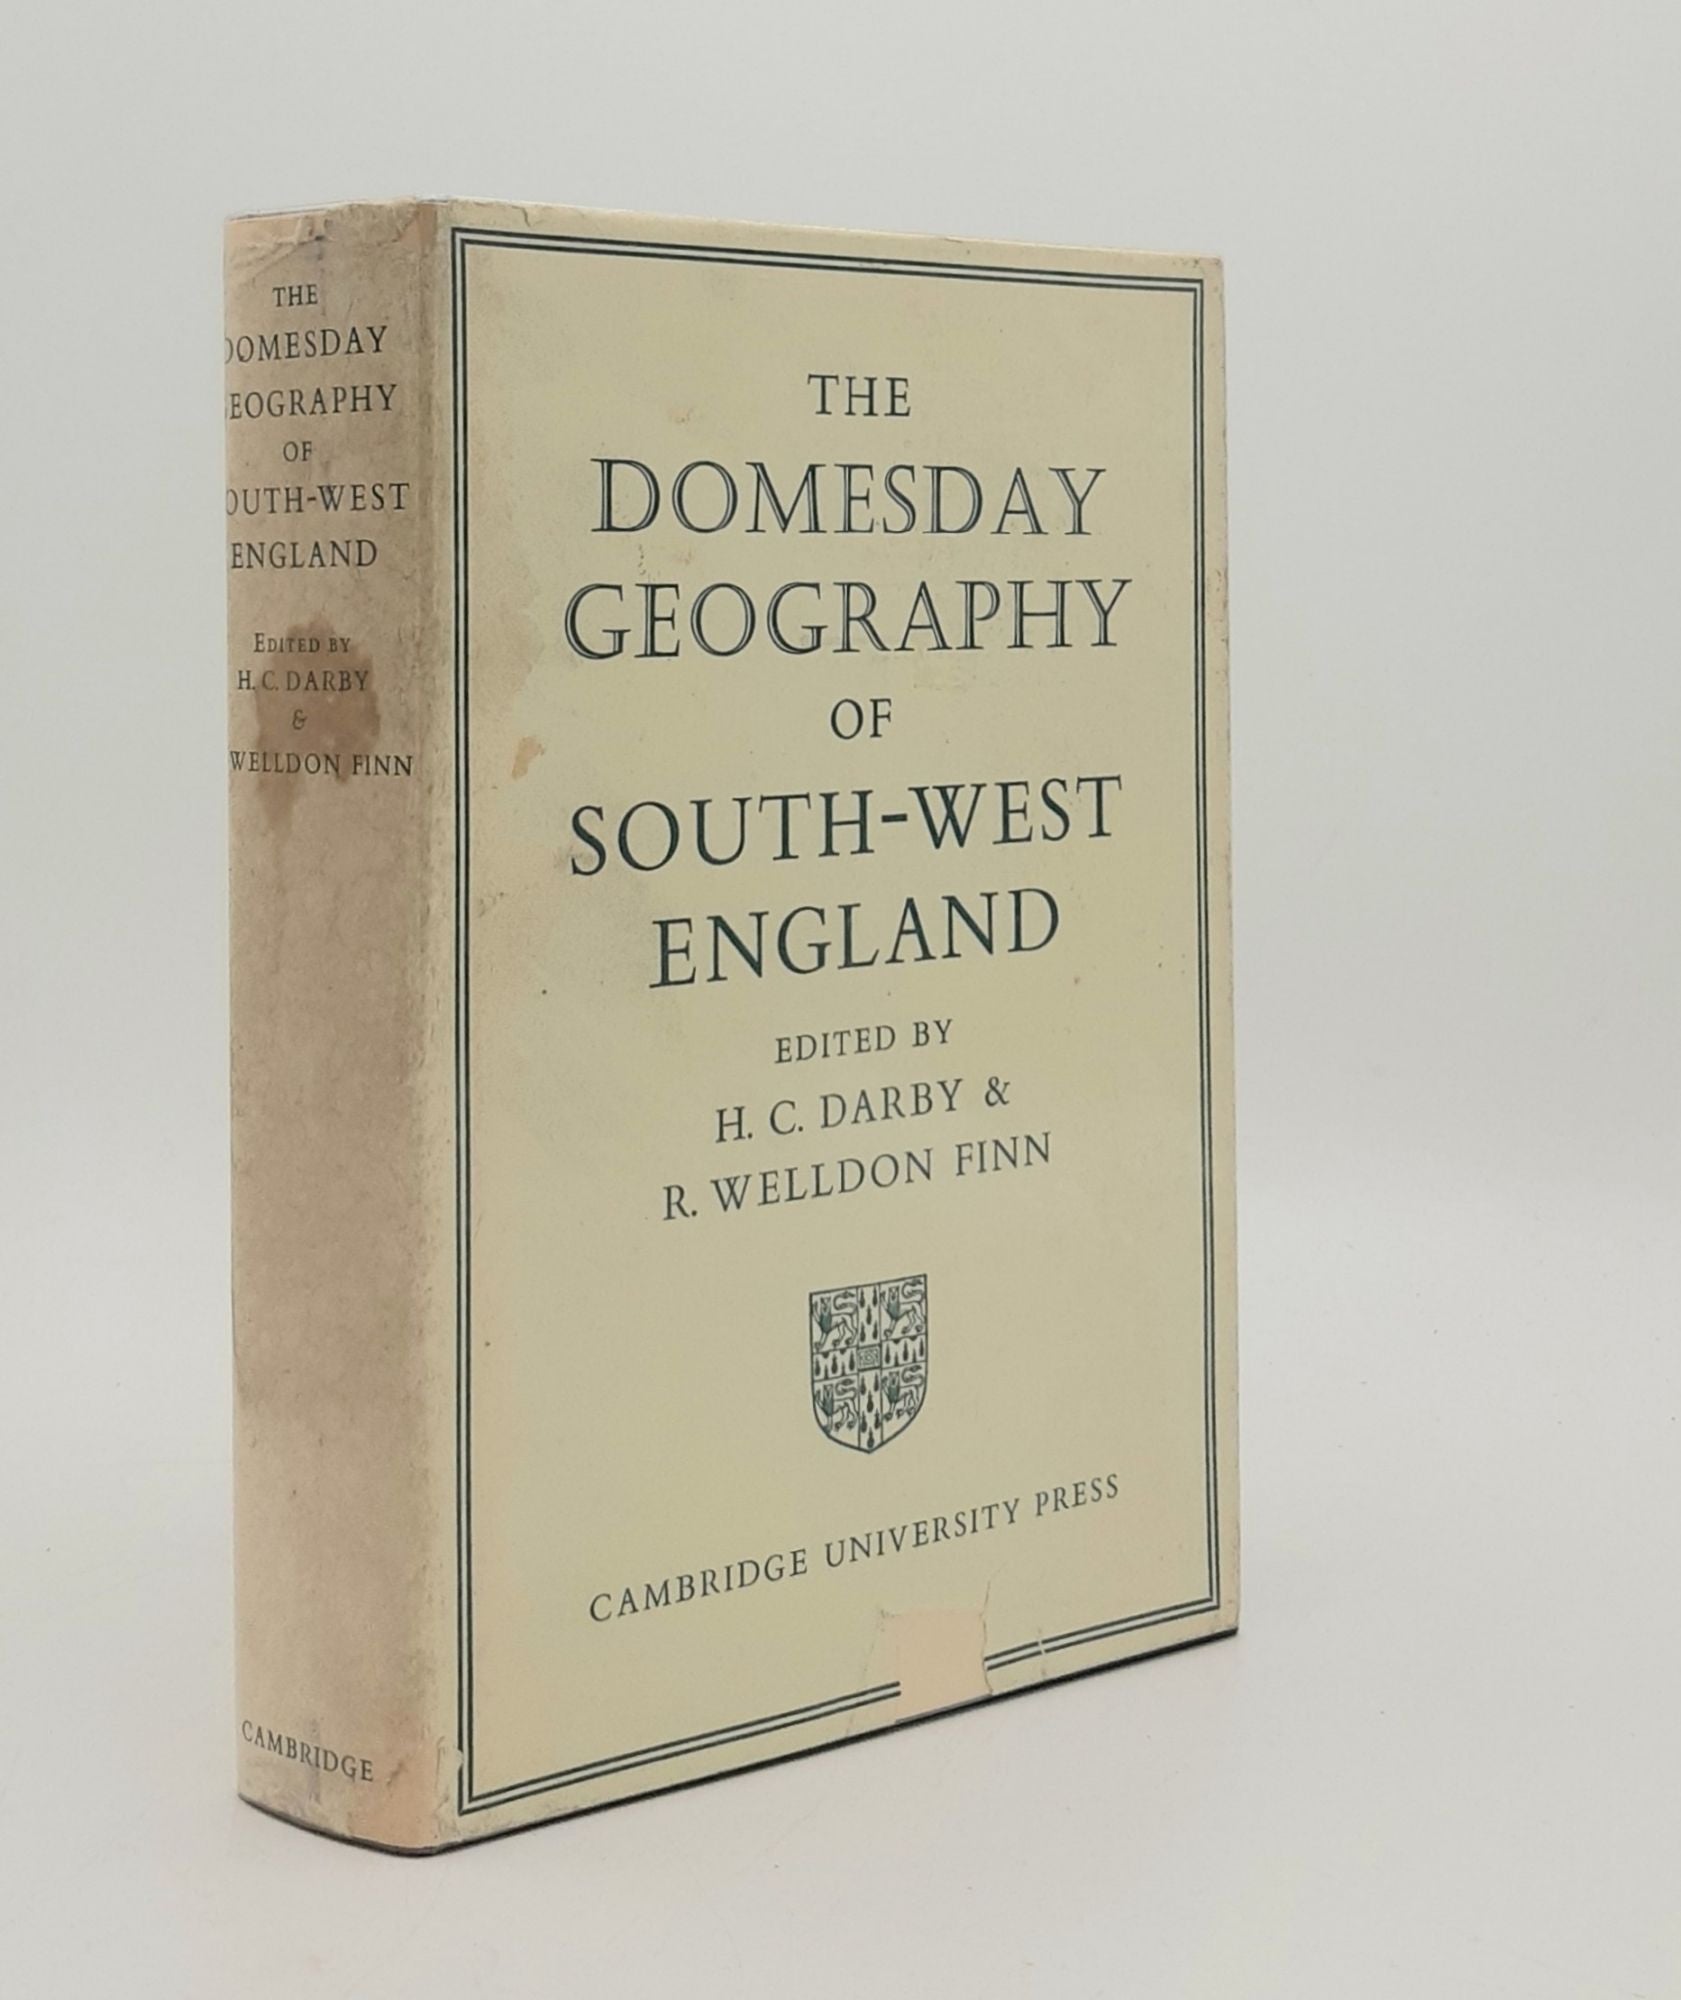 DARBY H.C., WELLDON FINN R. - The Domesday Geography of South-West England